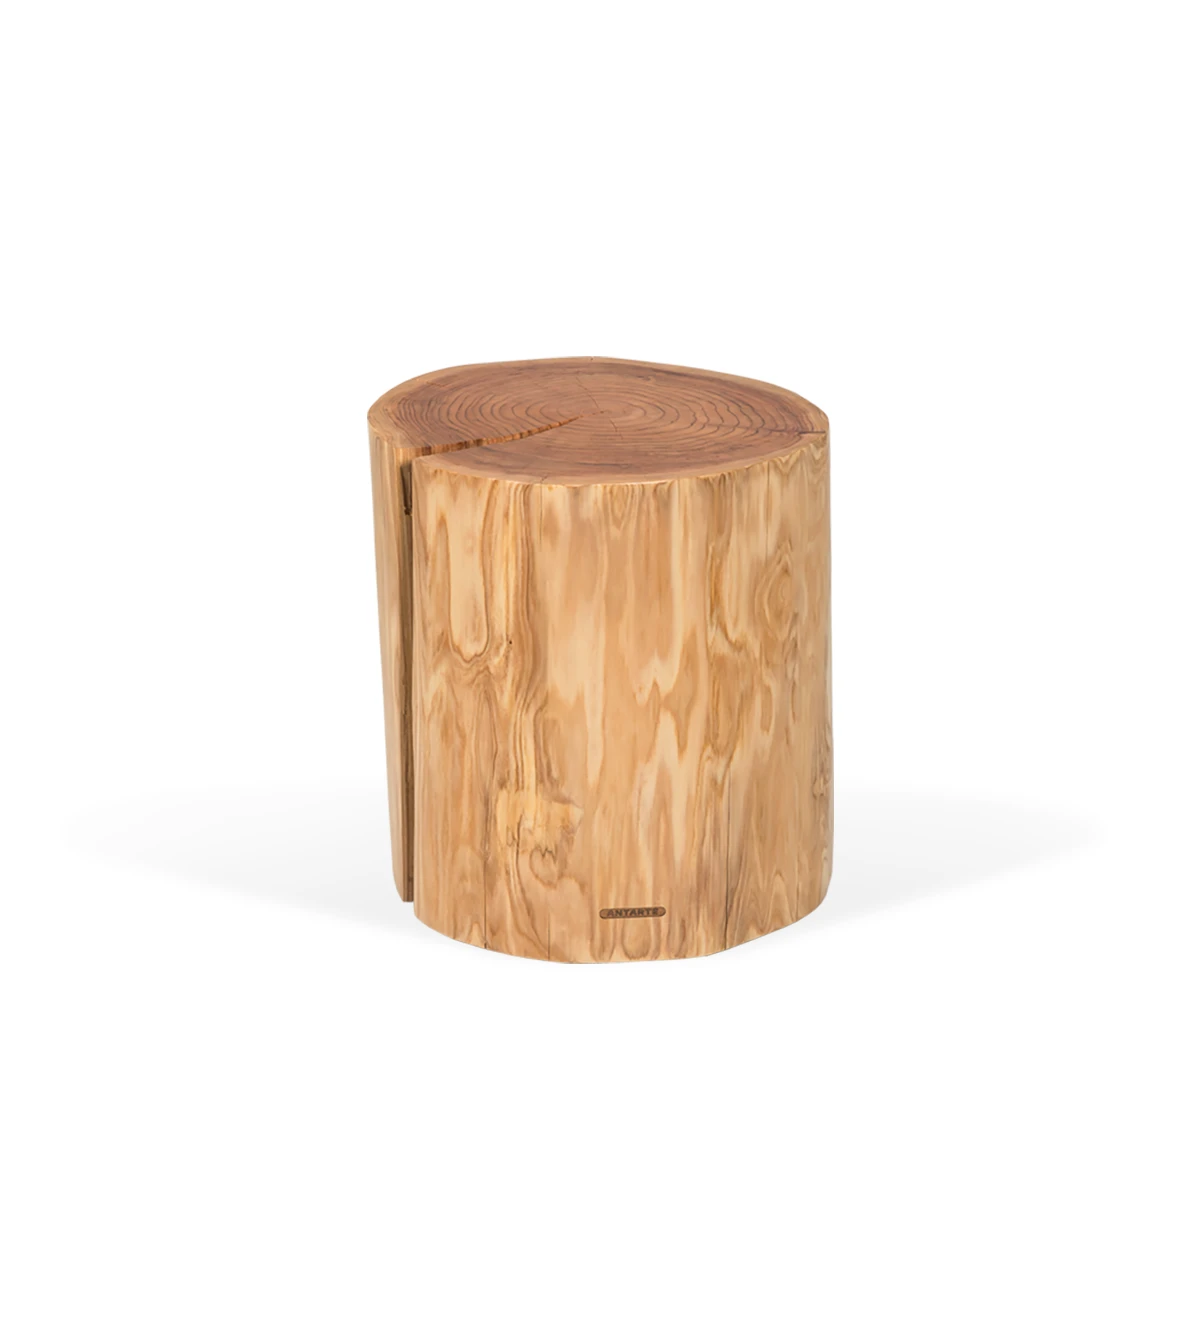 High trunk center table in natural cryptomeria wood, Ø 45 to 55 cm.